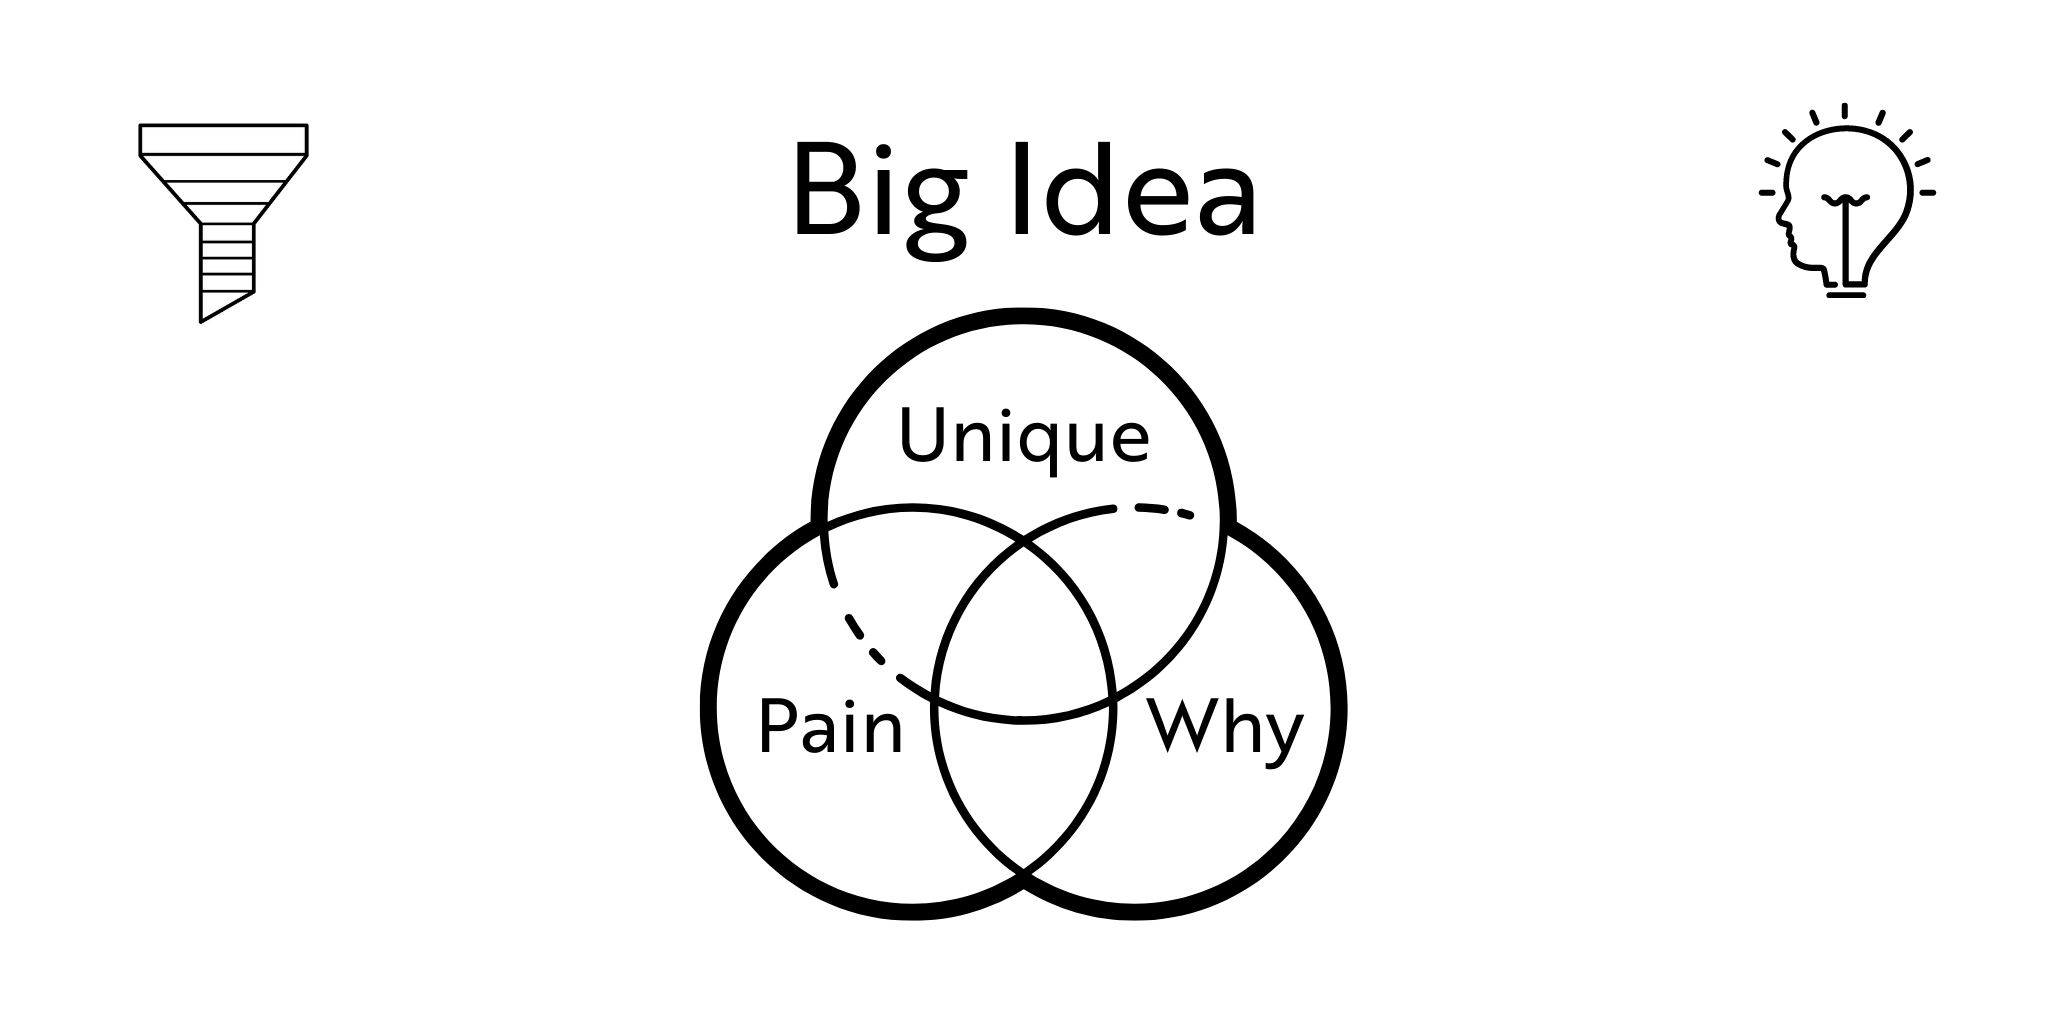 What's Your Big Idea?